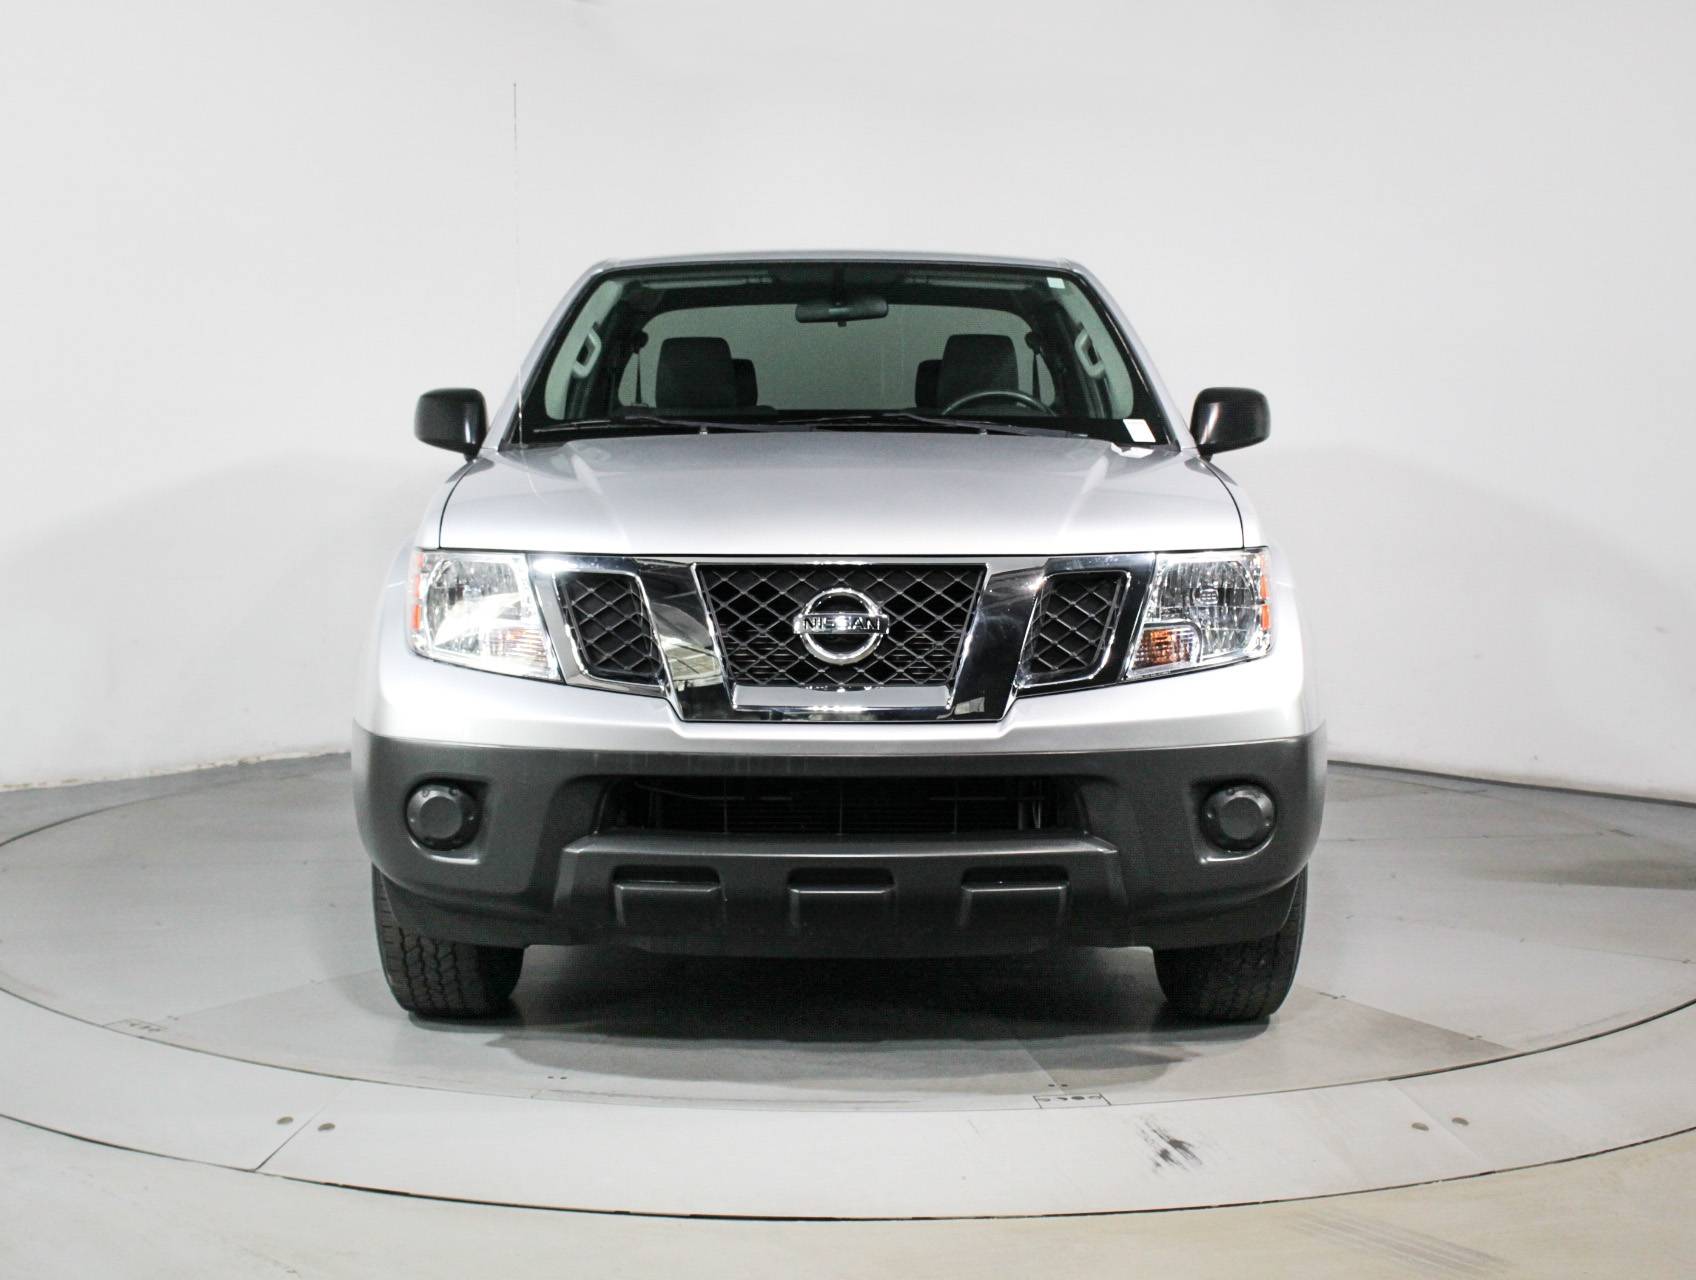 Florida Fine Cars - Used NISSAN FRONTIER 2013 HOLLYWOOD S